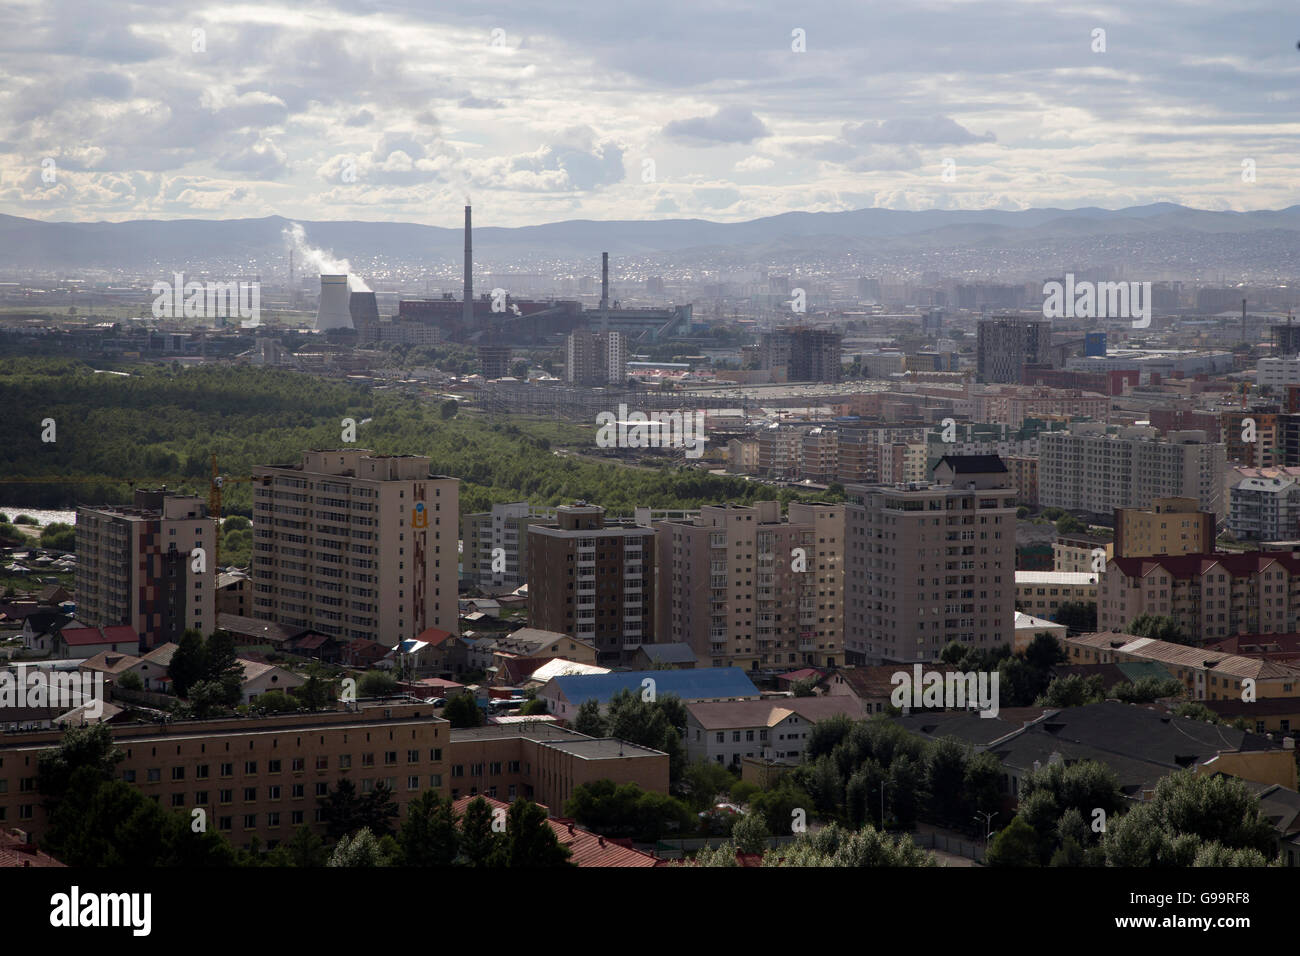 Ulaanbaatar is the capital and the largest city of Mongolia. Stock Photo